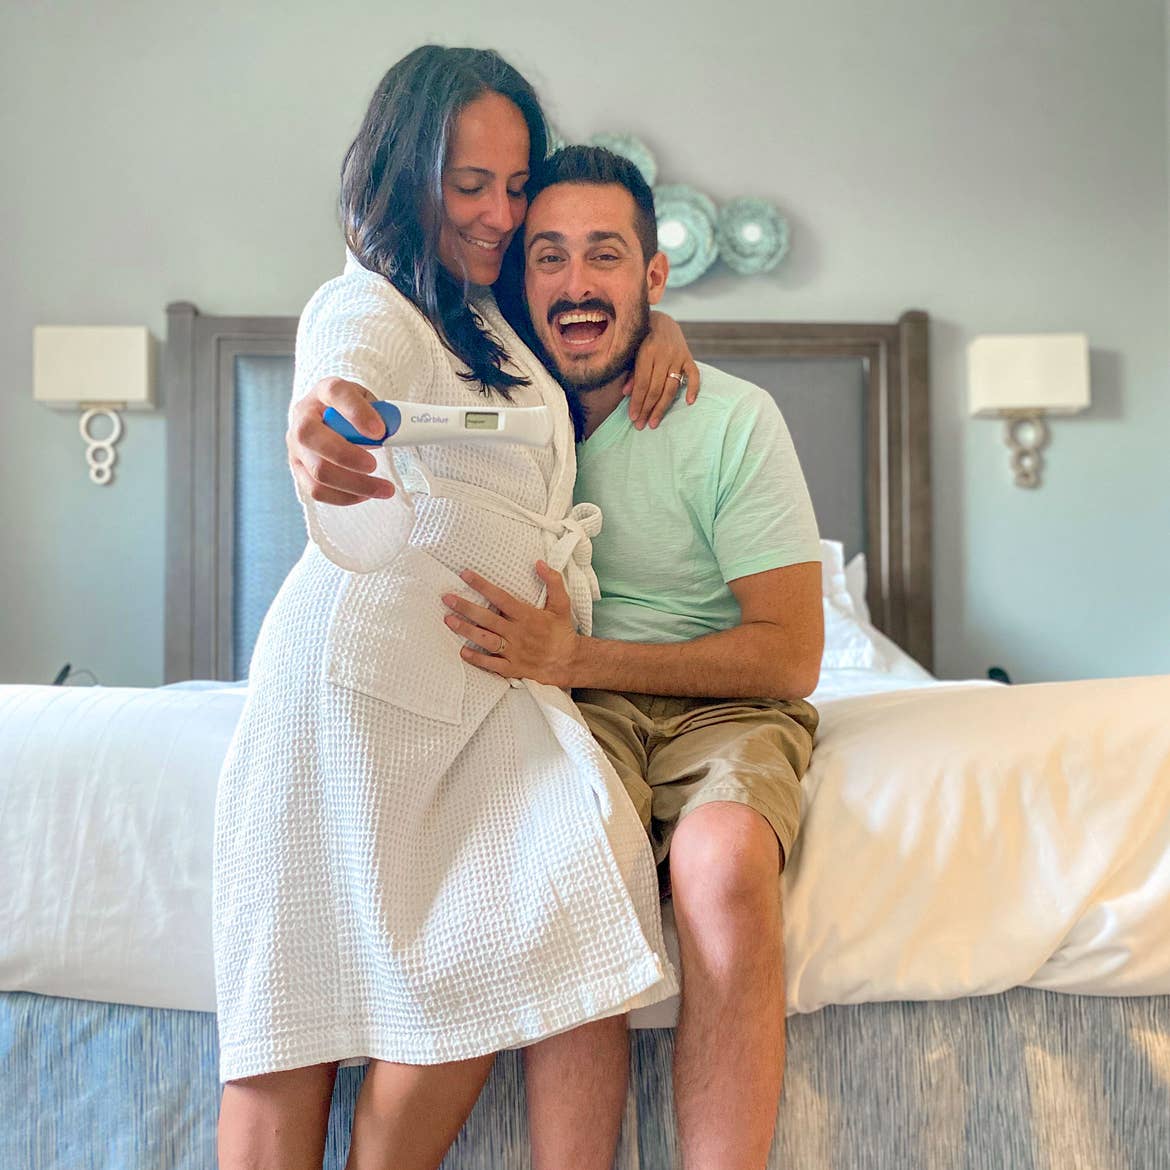 Featured Contributor, Danny Pitaluga (right) smiles as he hugs his wife, Val (left), as she holds a positive pregnancy test in a white robe.